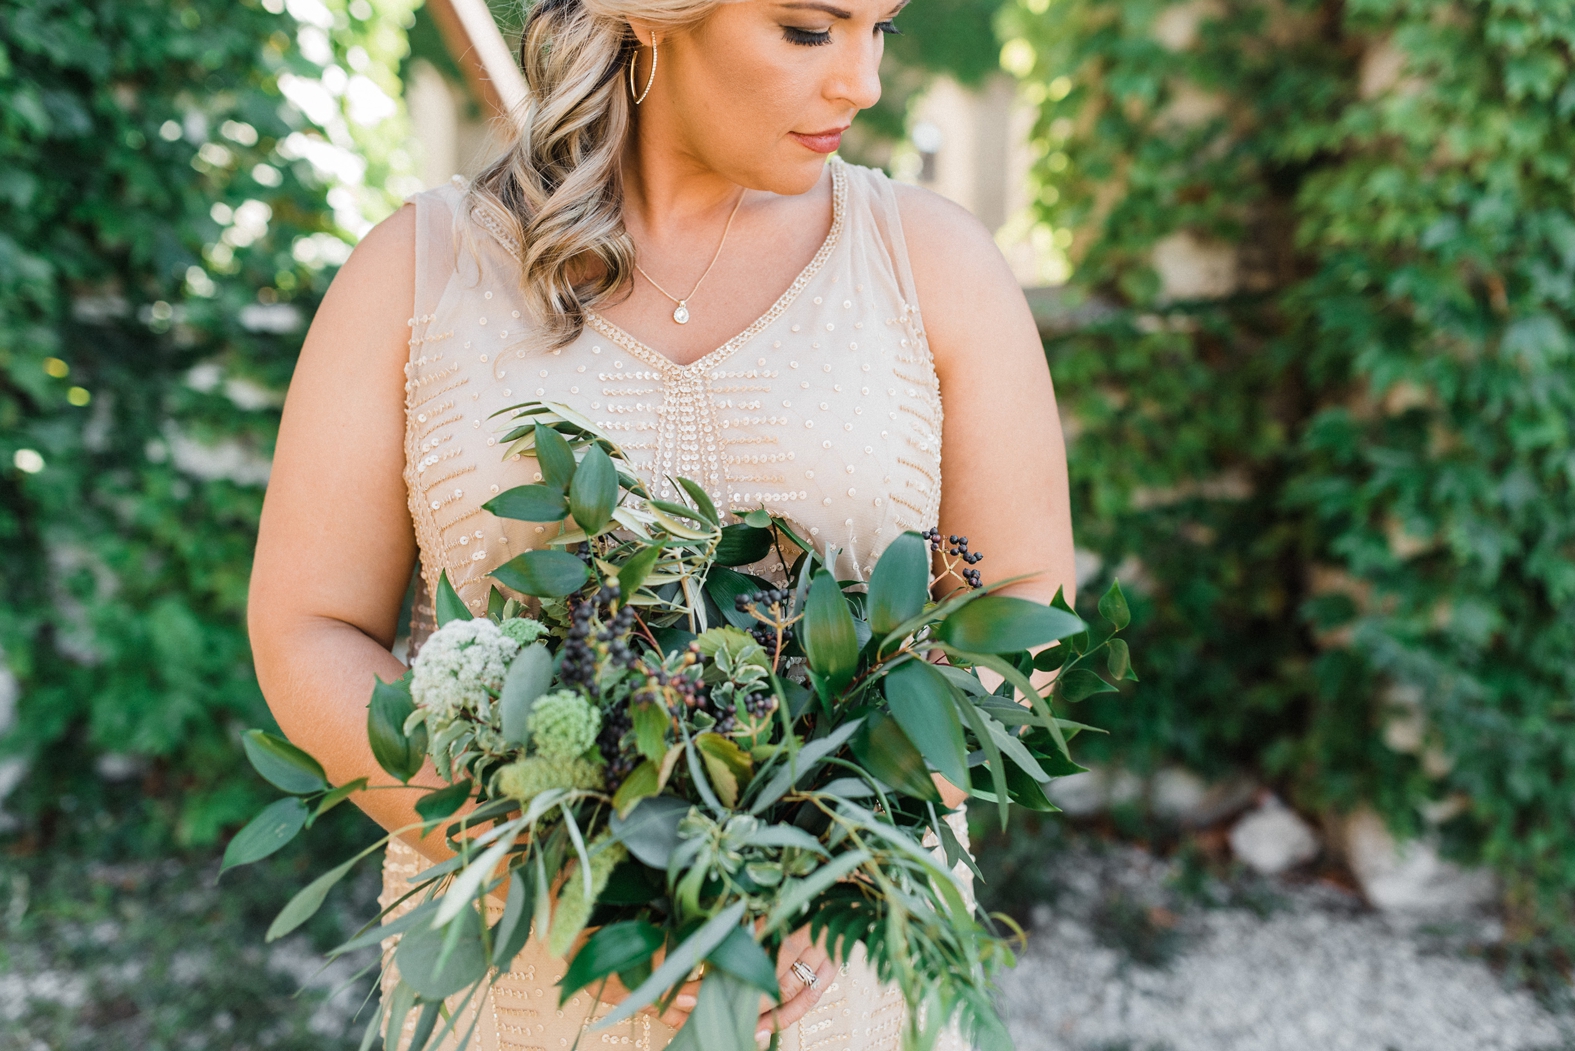 Bride in neutral champagne beaded bridesmaid dress with gold hoop earrings and greenery bridesmaids bouquet.